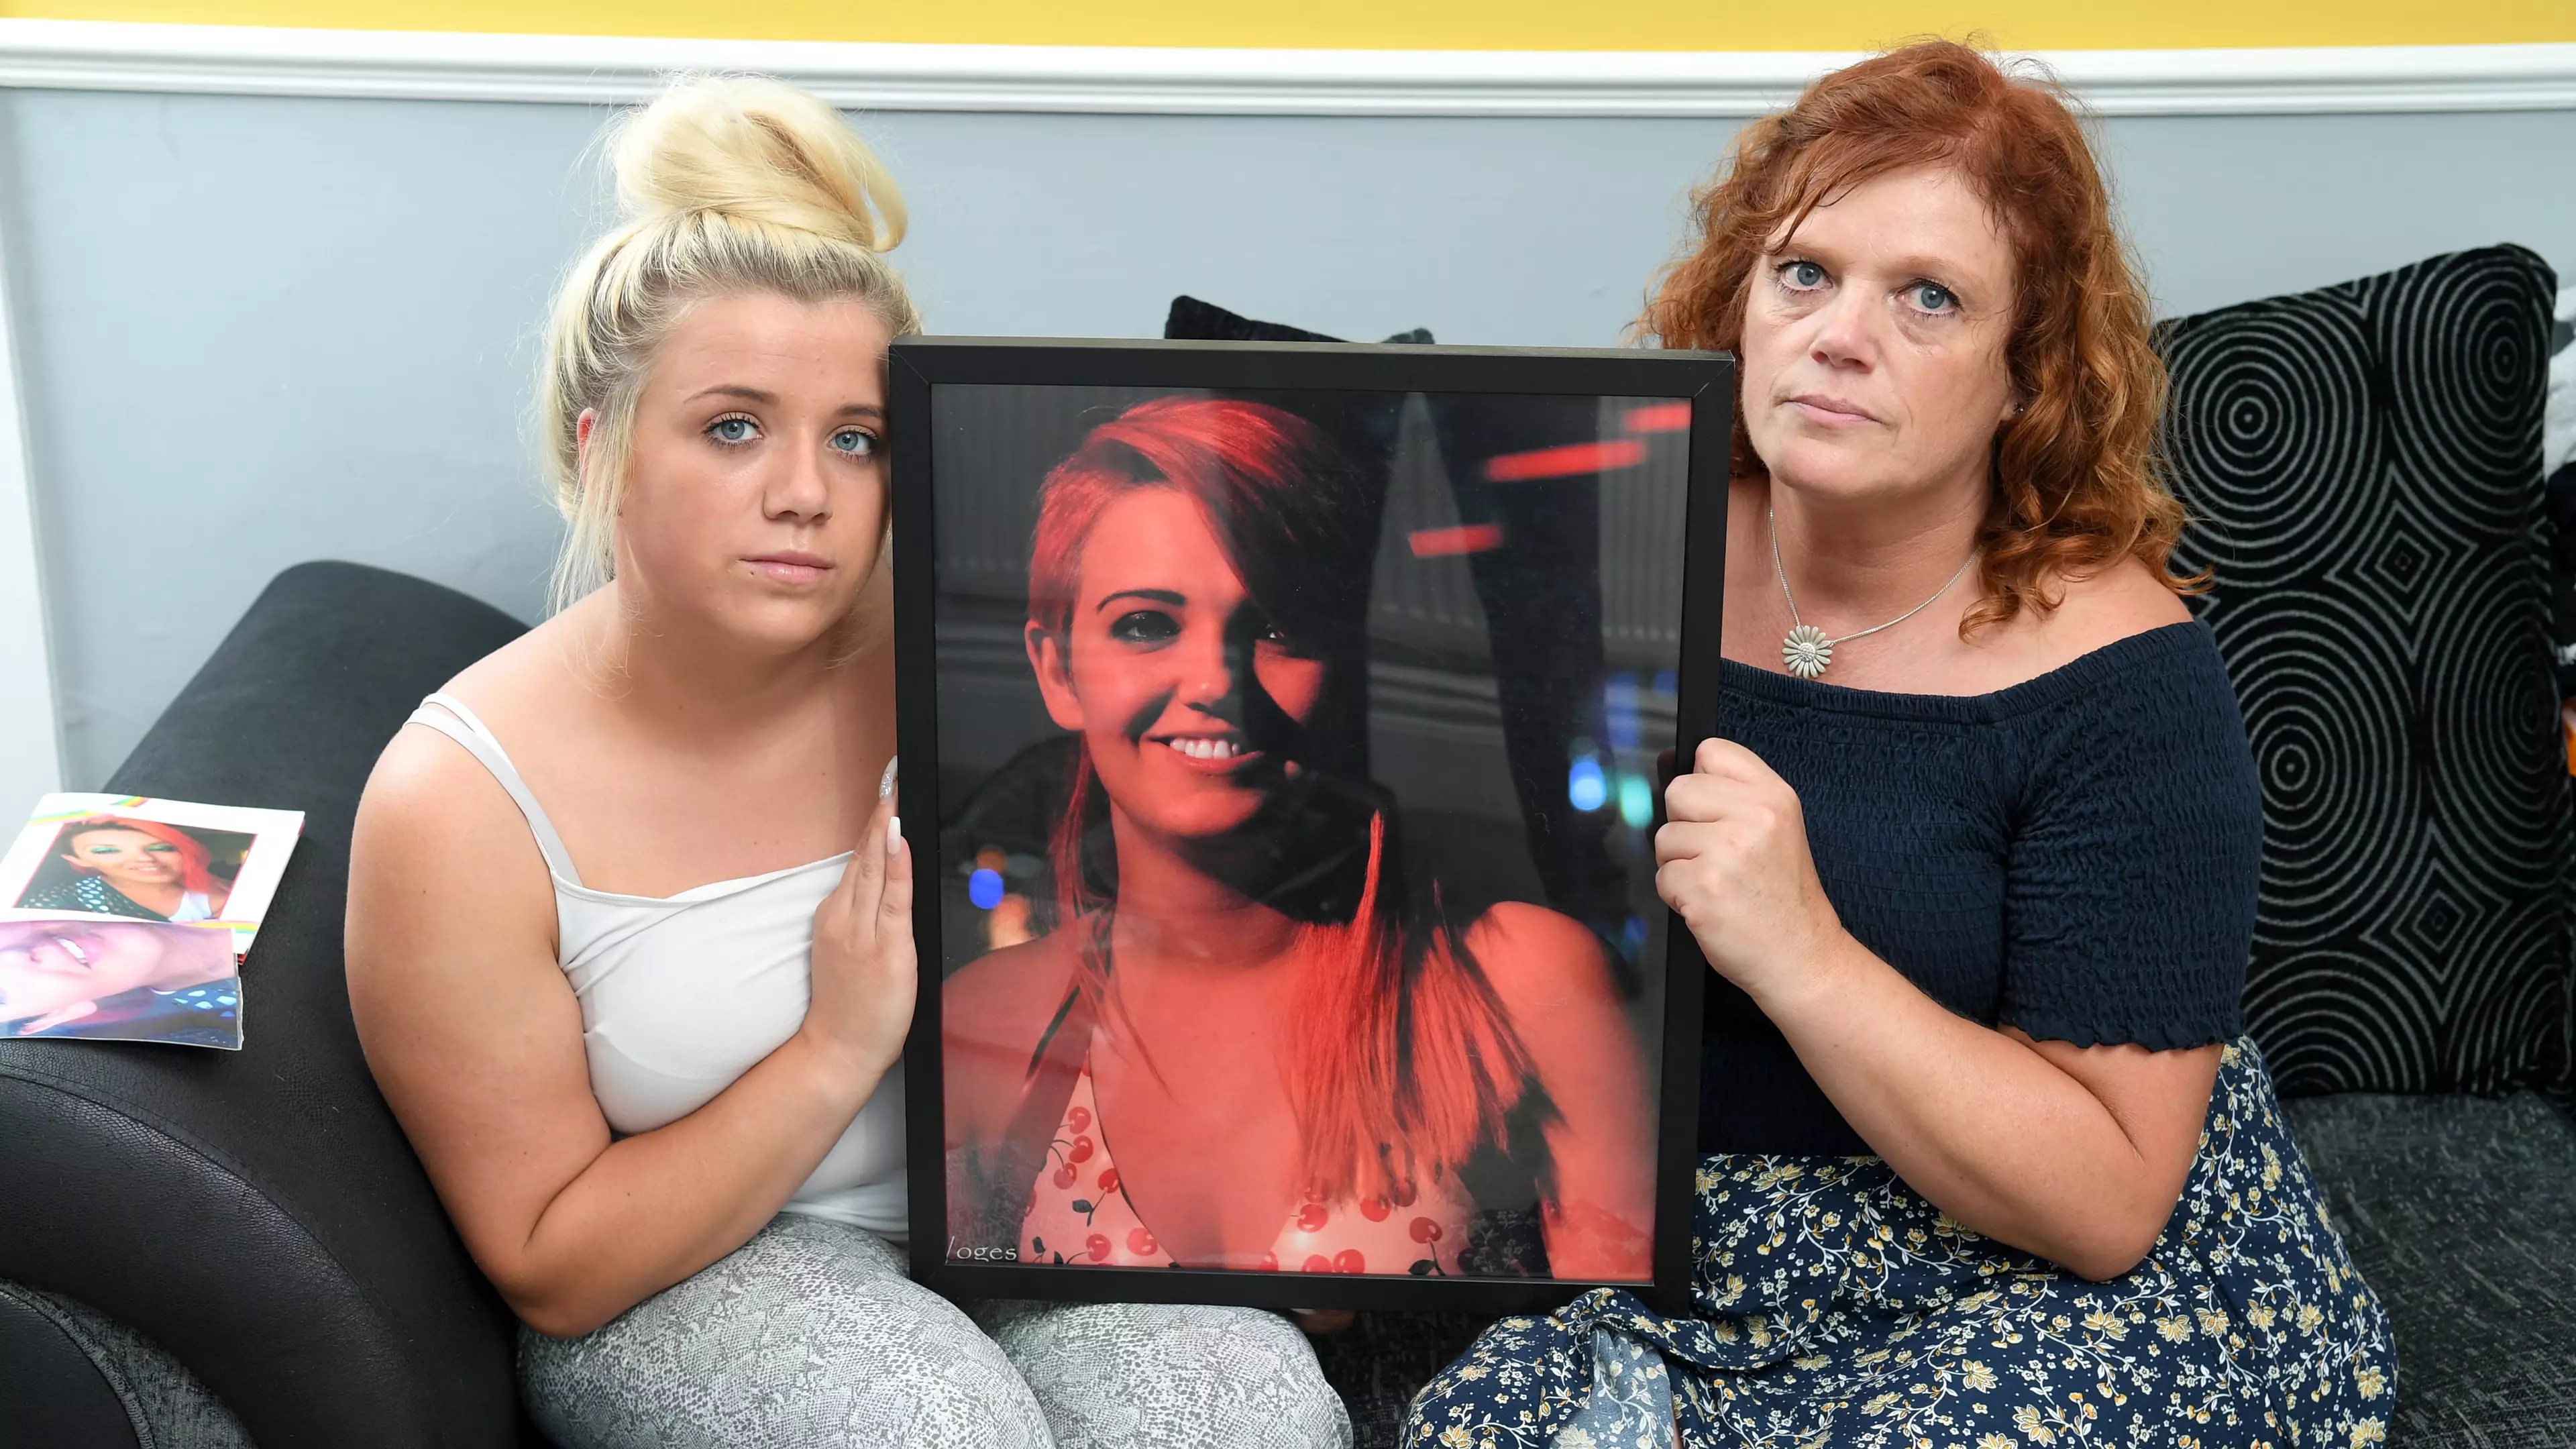 The Family Of A Murdered Young Woman Has Called For A Review Of ‘Clare’s Law’